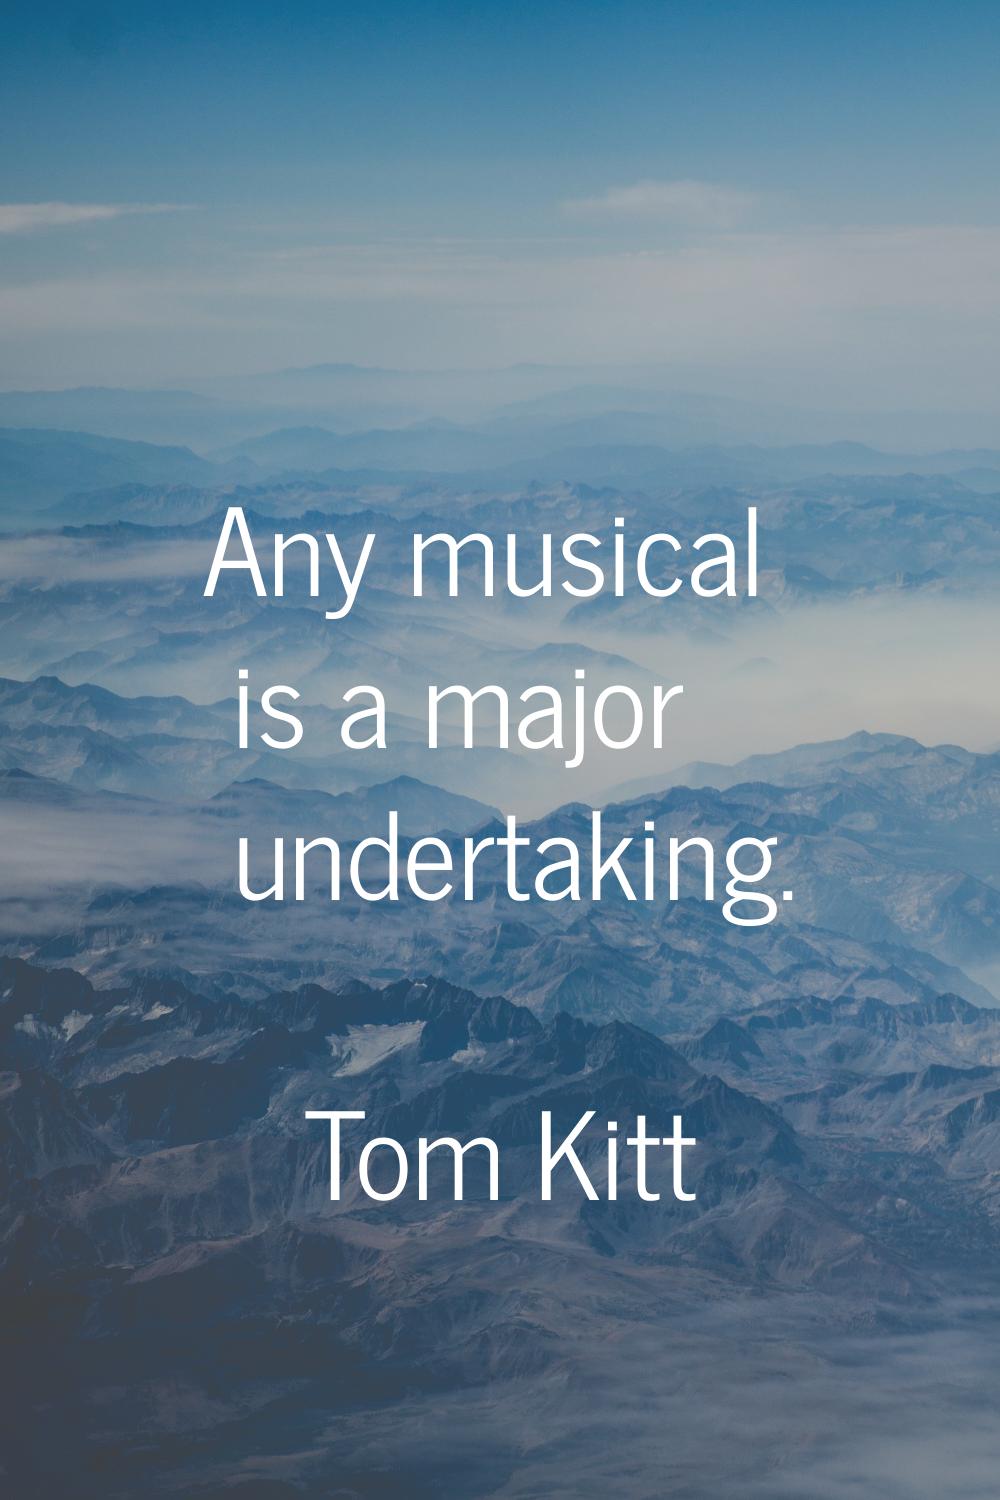 Any musical is a major undertaking.